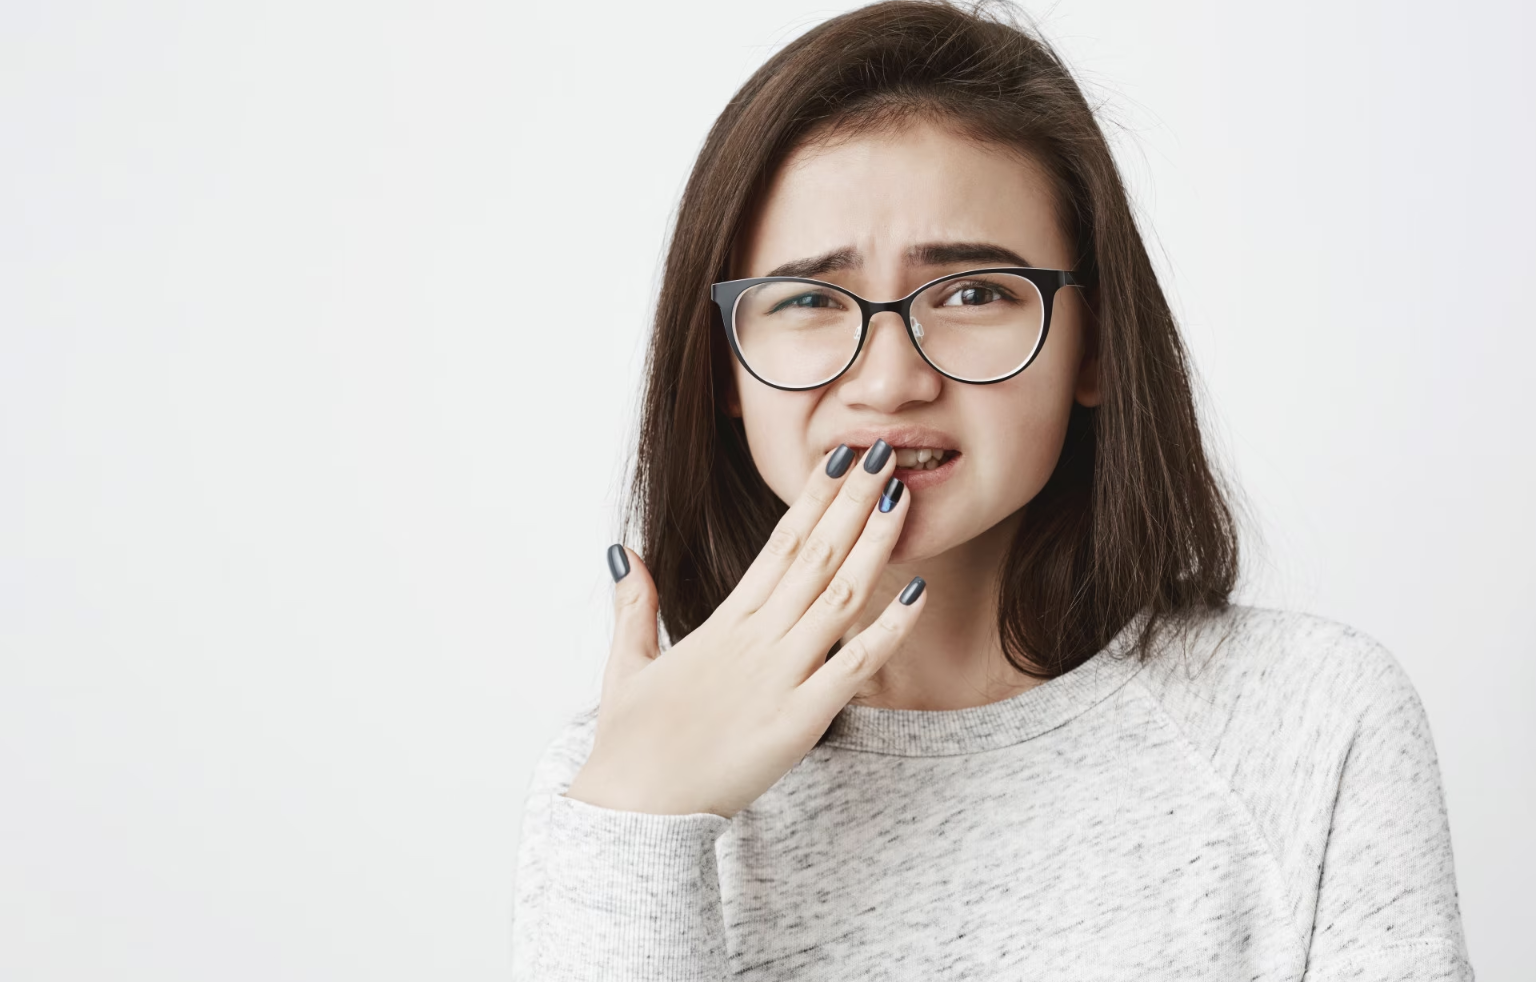 8 Common Oral And Dental problems
